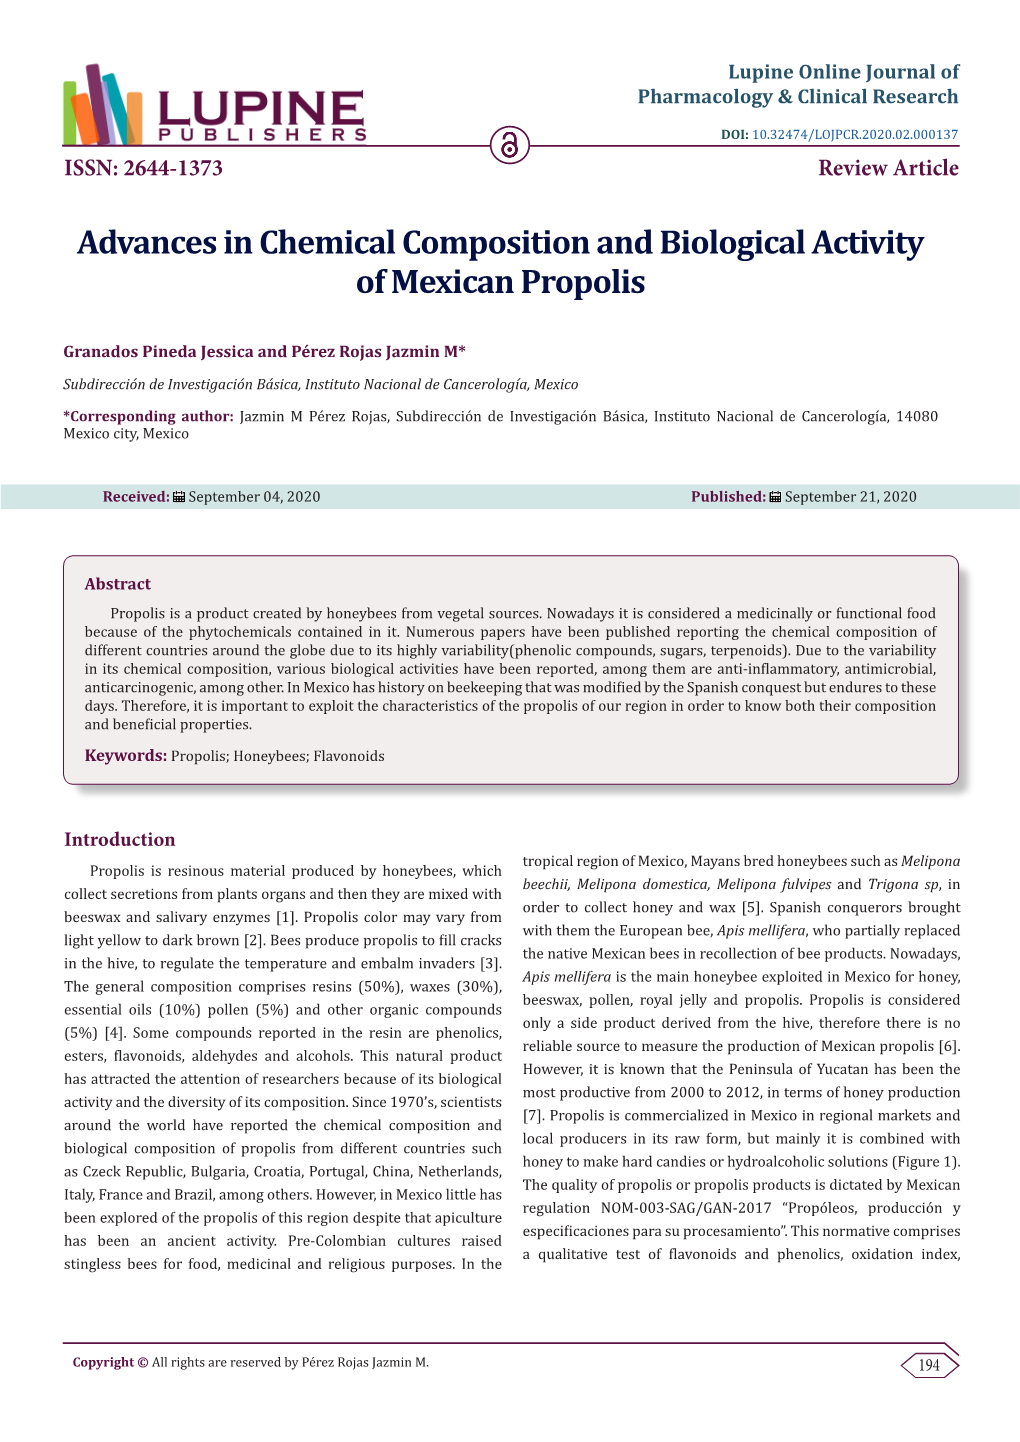 Advances in Chemical Composition and Biological Activity of Mexican Propolis